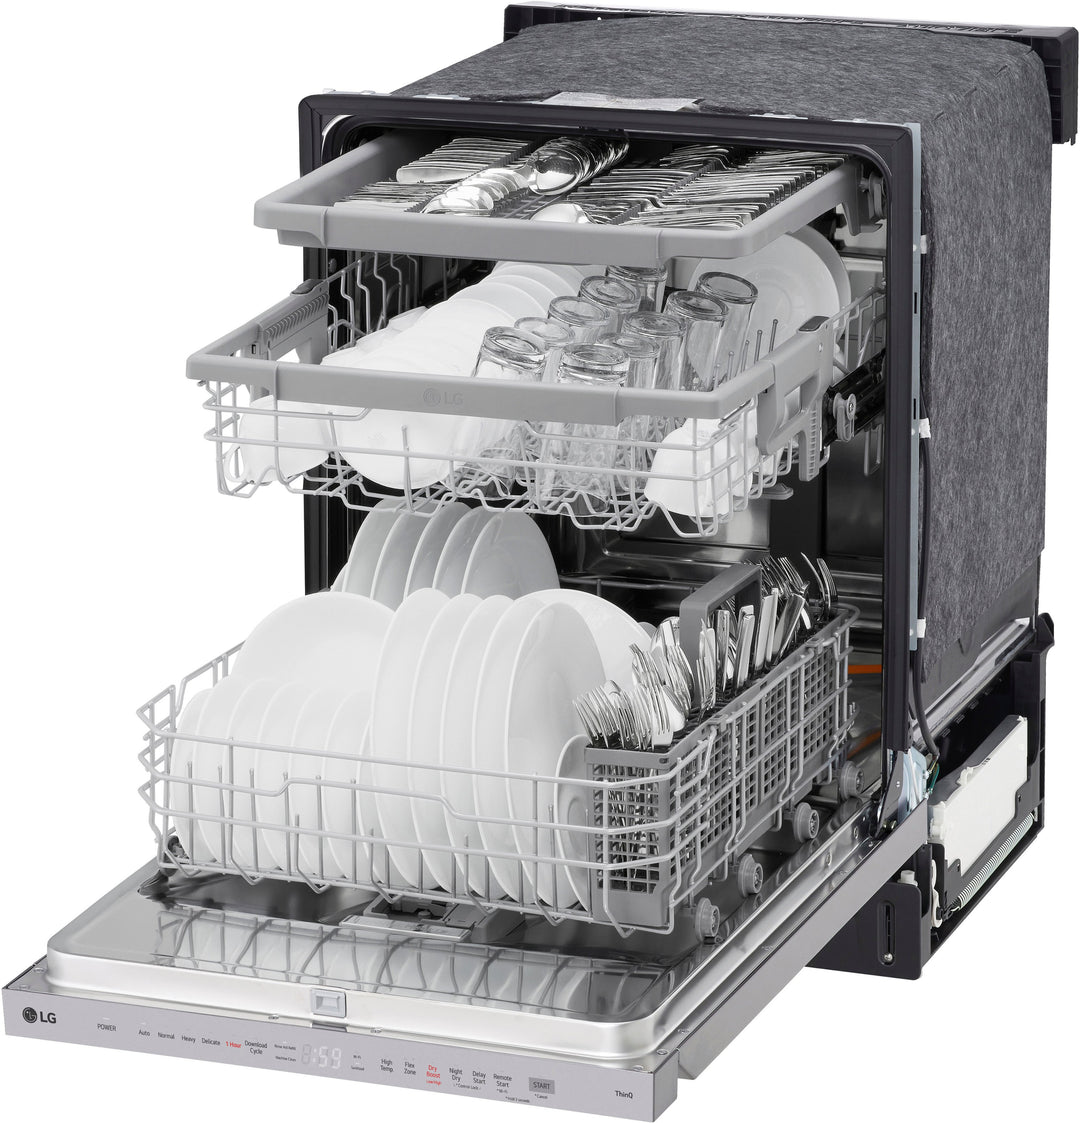 LG - Top Control Smart Built-in Stainless Steel Tub Dishwasher with 3rd Rack, QuadWash Pro and 46dBA - Stainless Steel_6